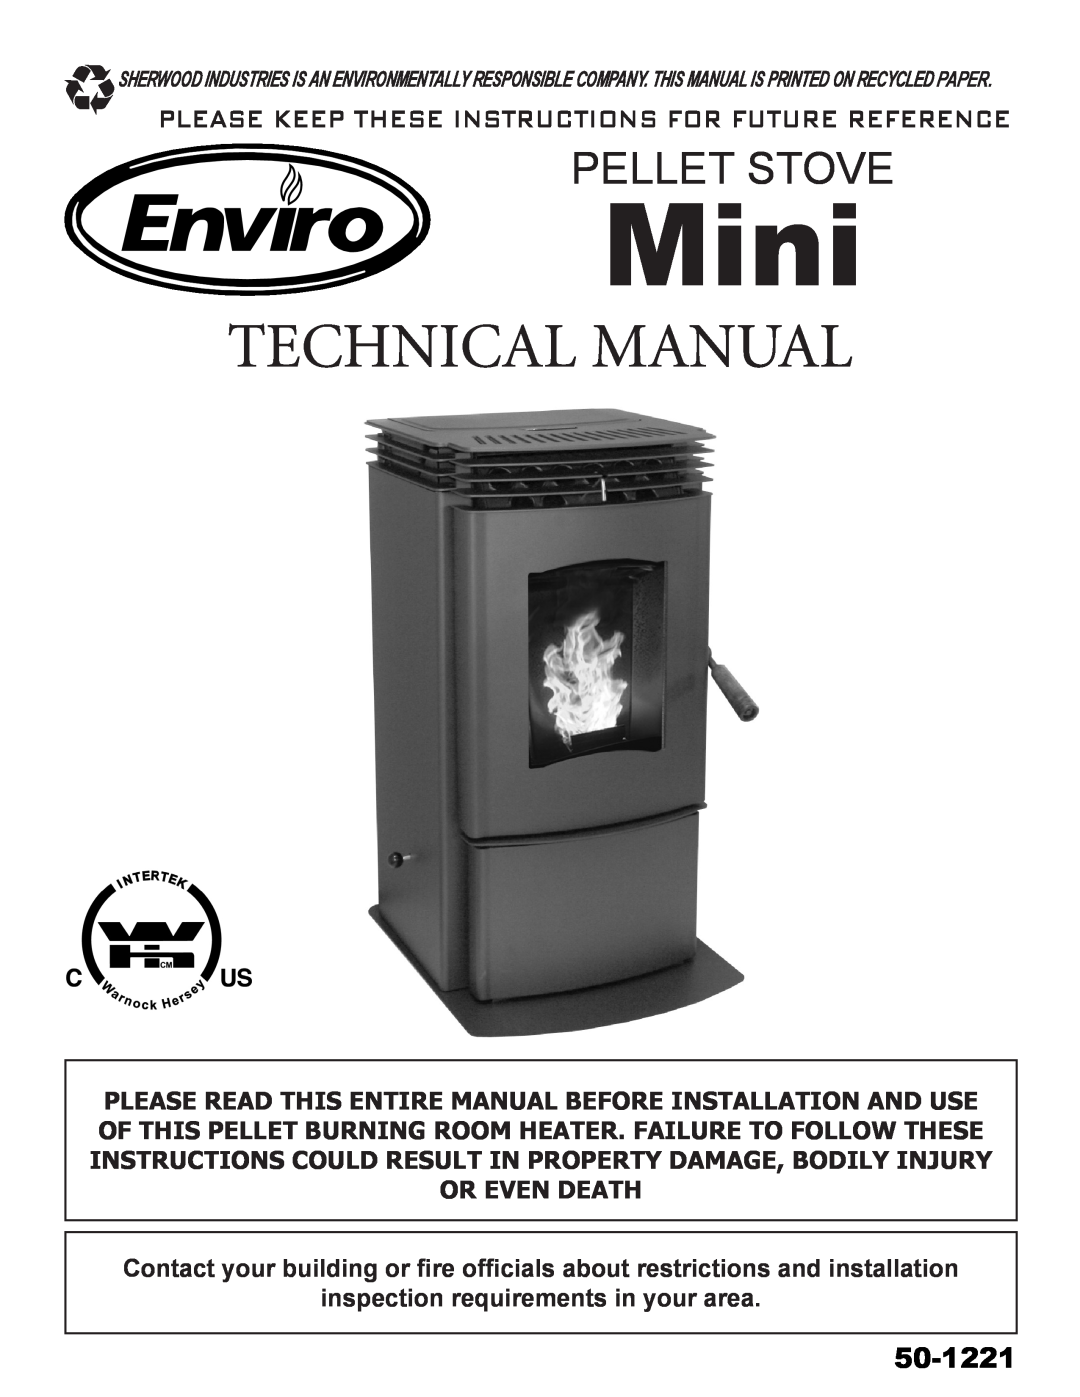 Enviro C-11150 technical manual 50-1221, Mini, Technical Manual, Pellet Stove, inspection requirements in your area 